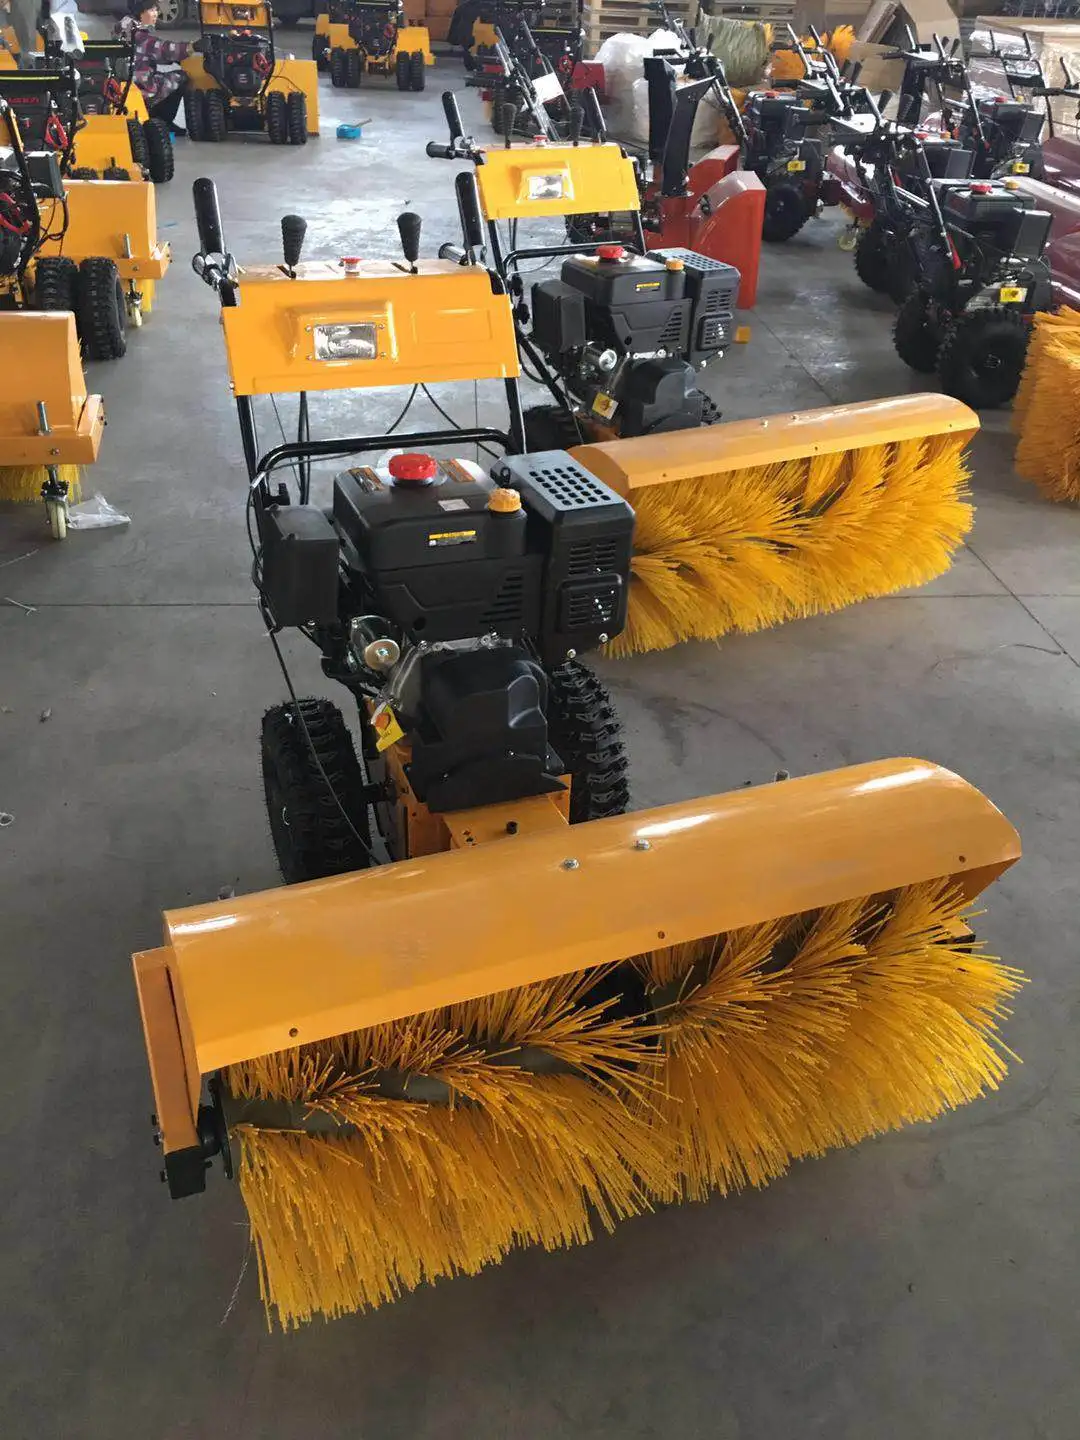 power sweeper for snow